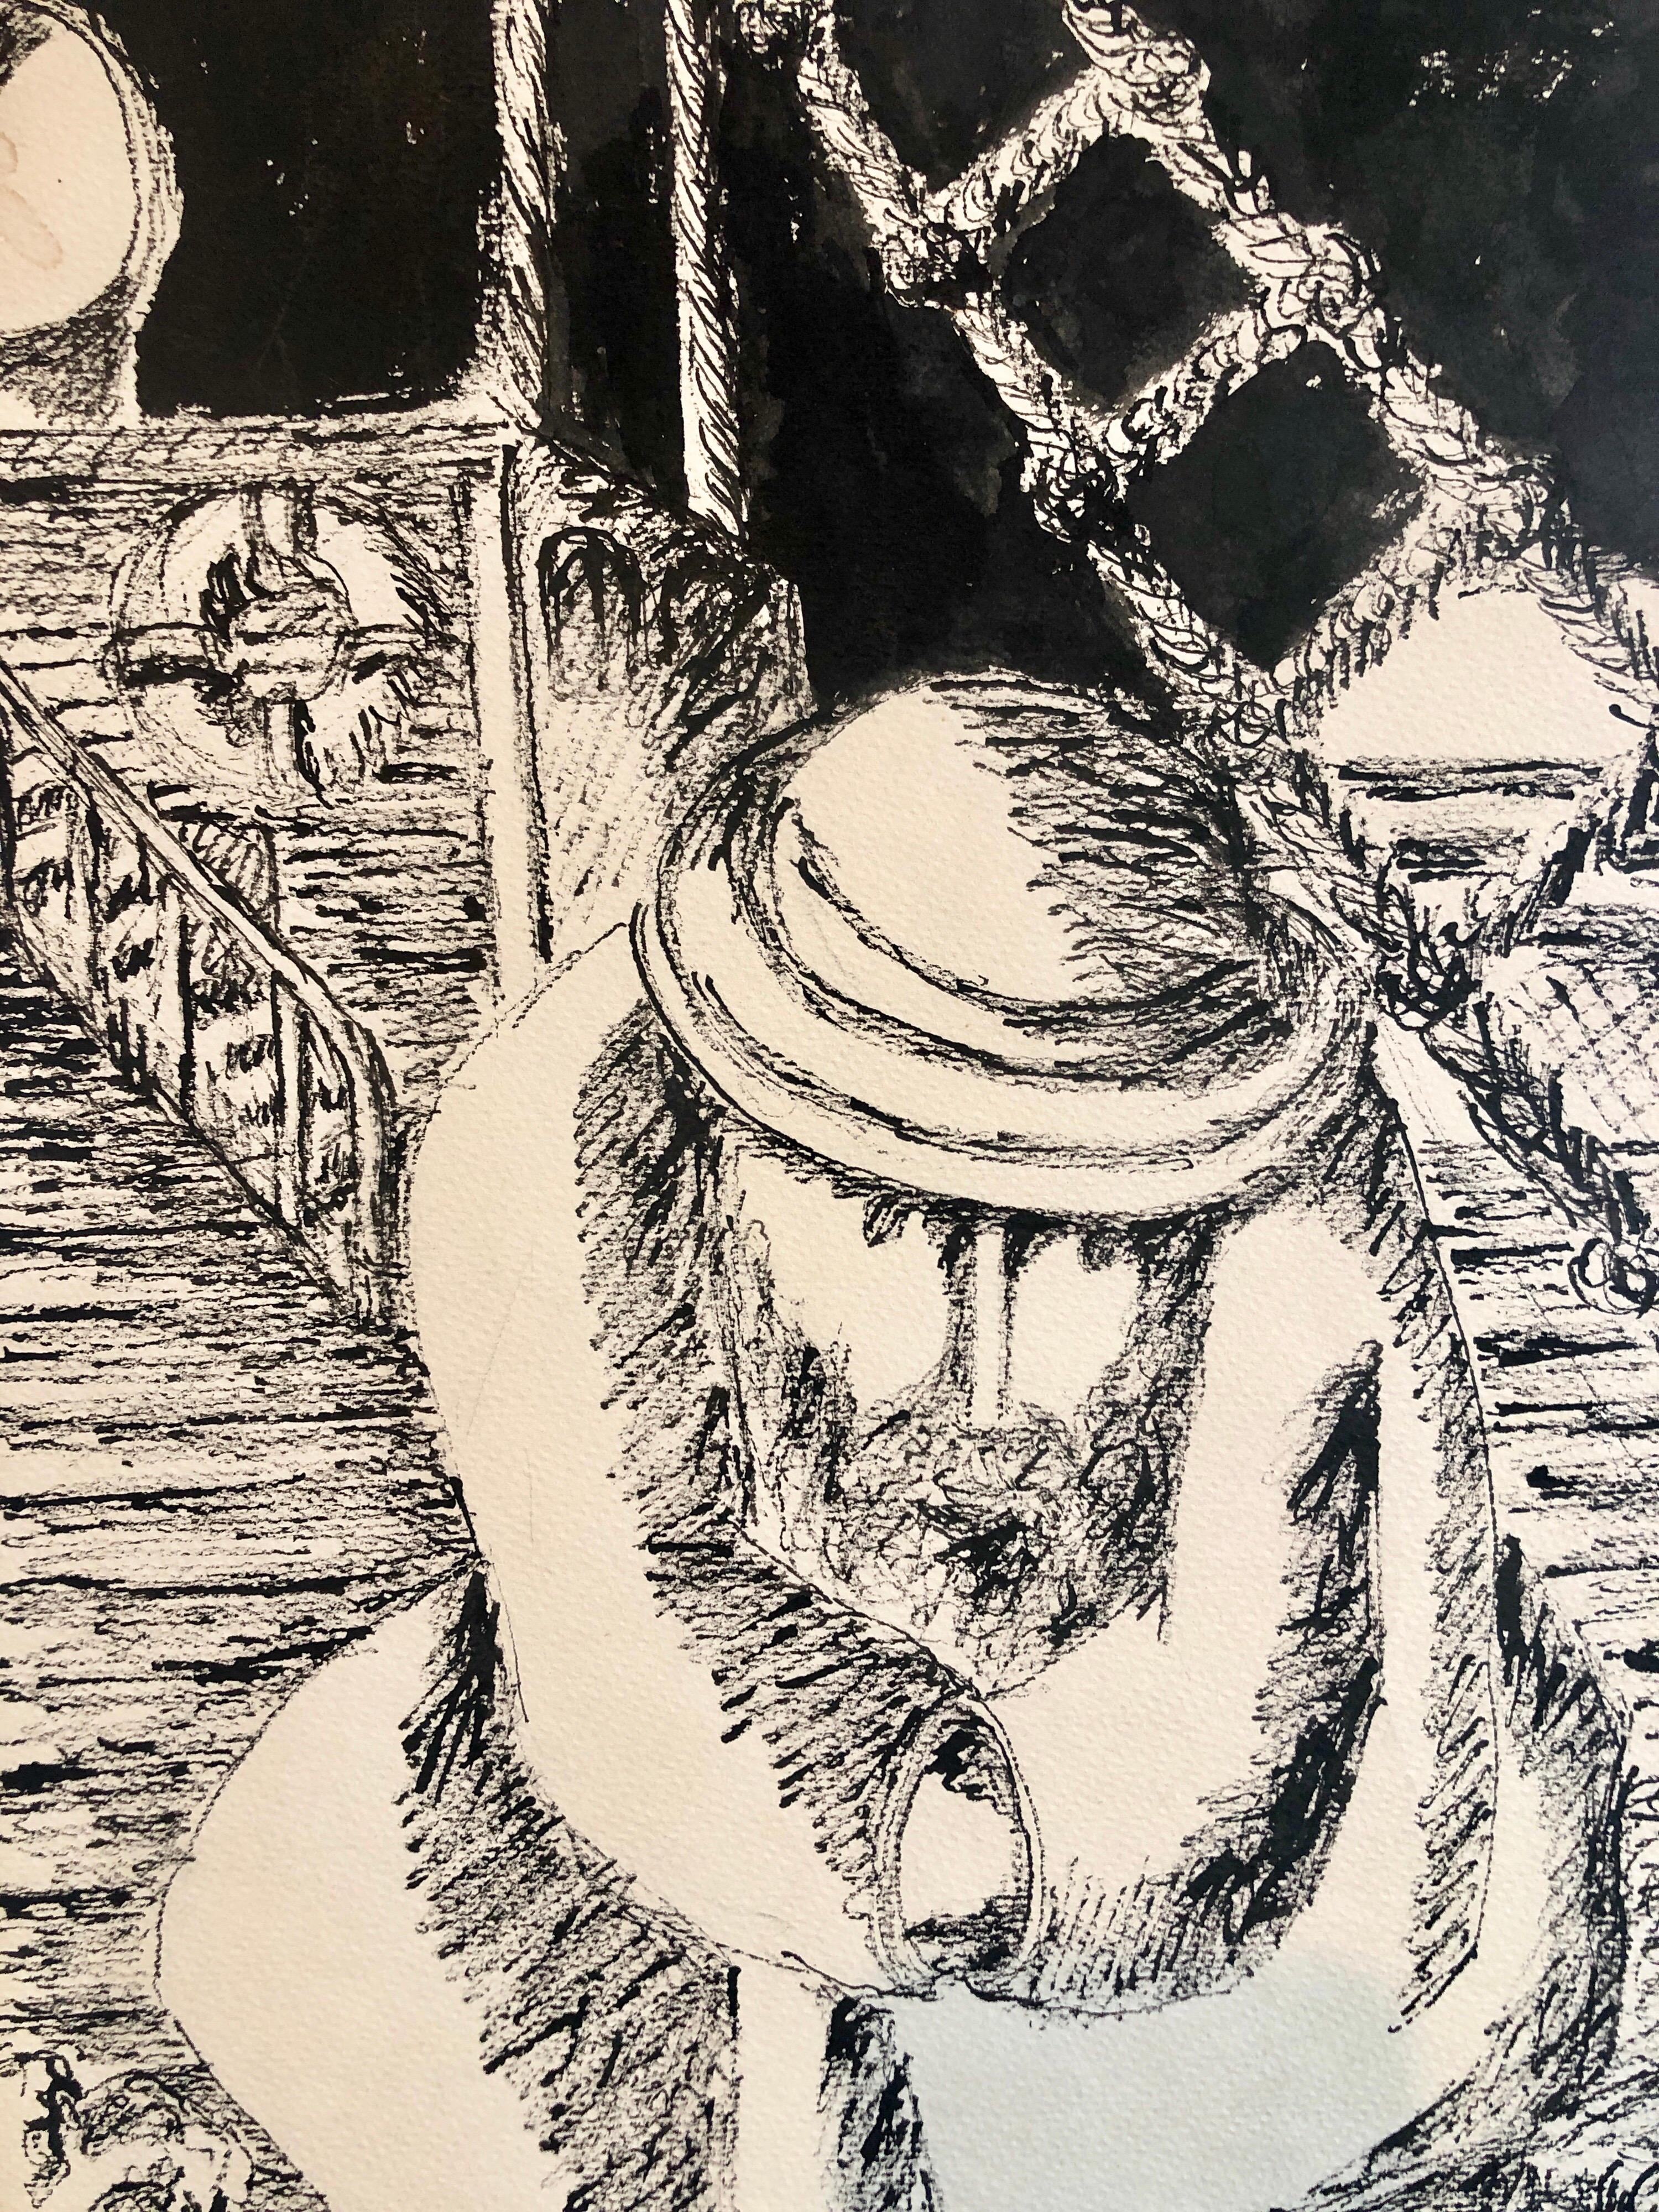 An ink drawing Judaic painting by modern artist Ben-Zion Weinman. It depicts a portrait of an old Jewish man. Coming over from Europe on a ship crossing. The work is signed 